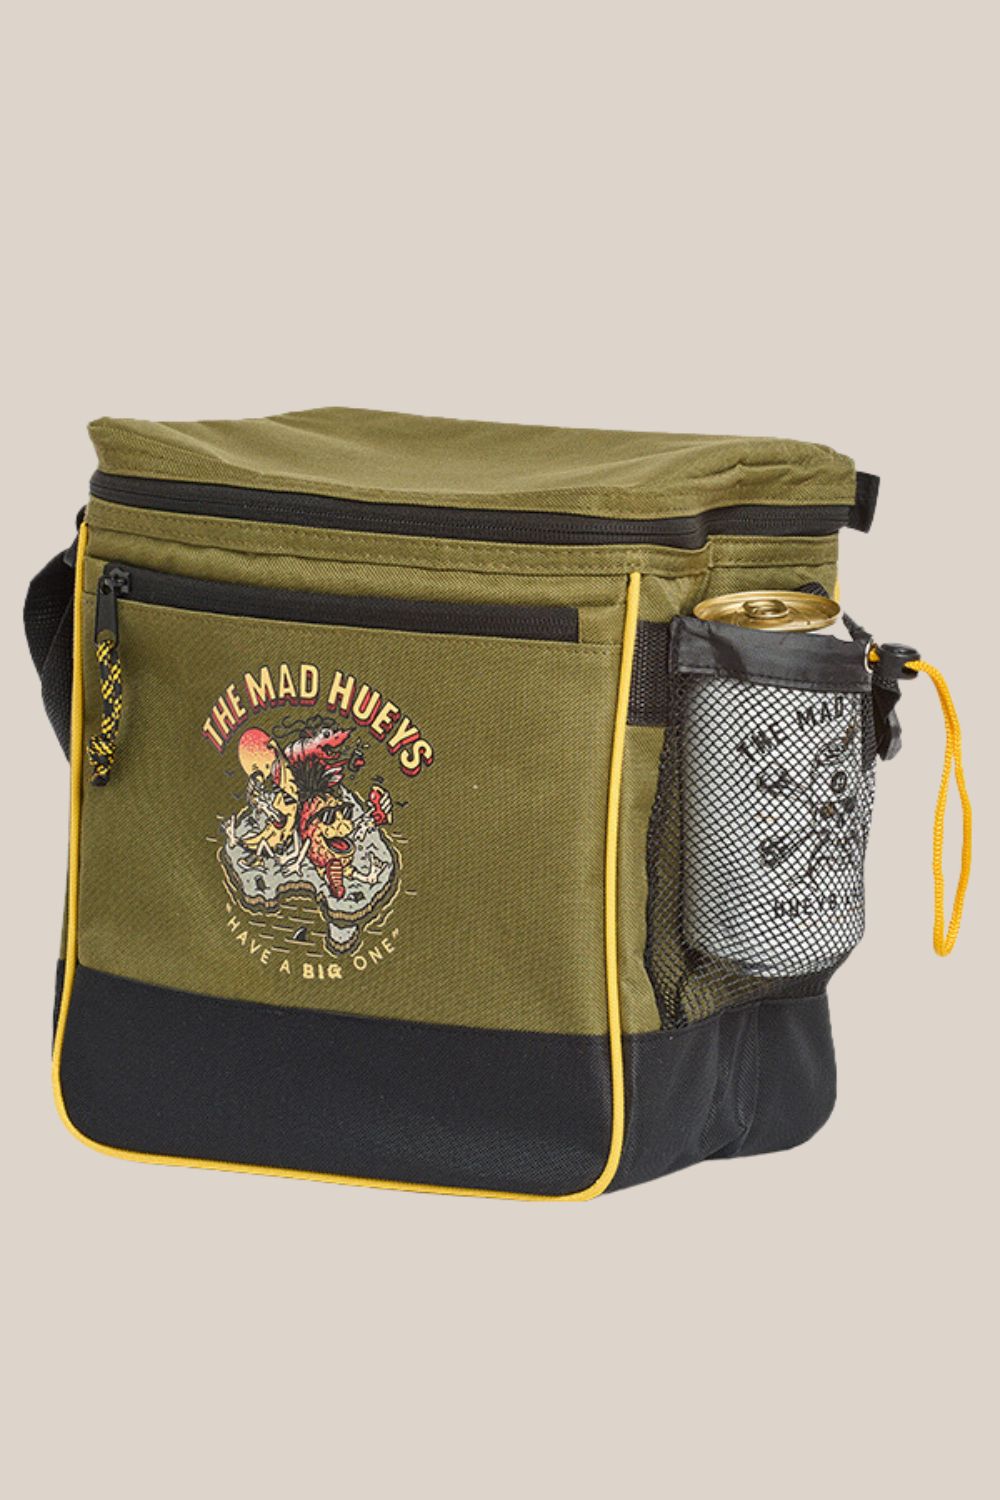 The Mad Hueys Big Day For It Cooler Bag